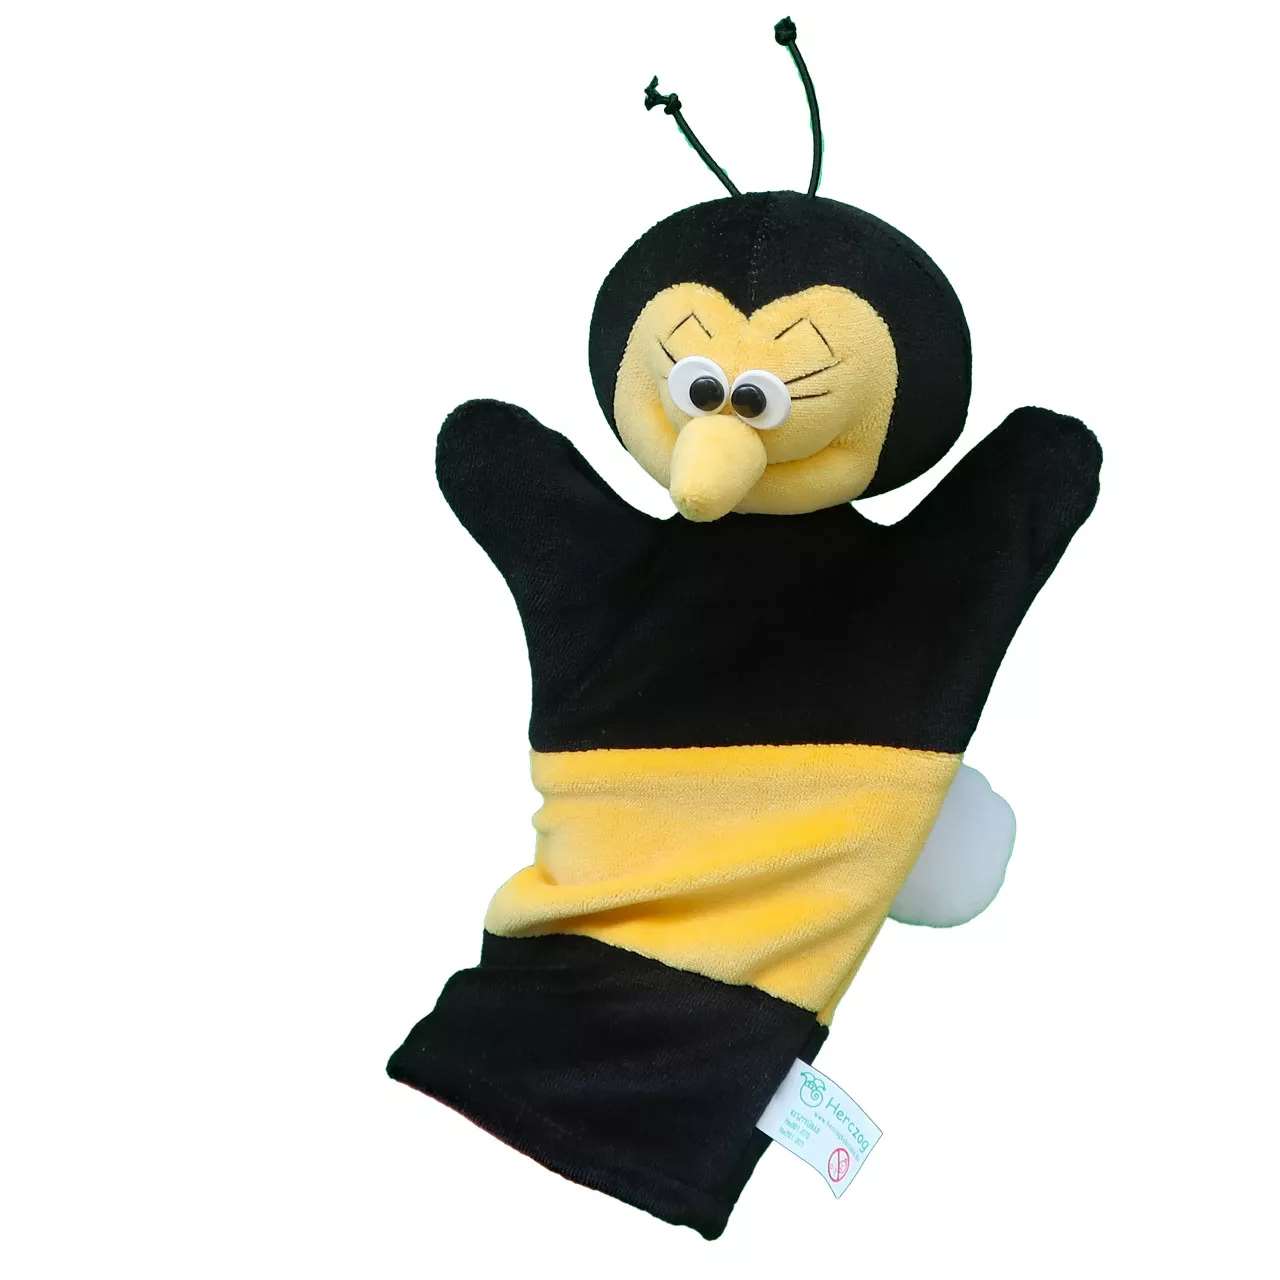 Wasp / bee hand puppet